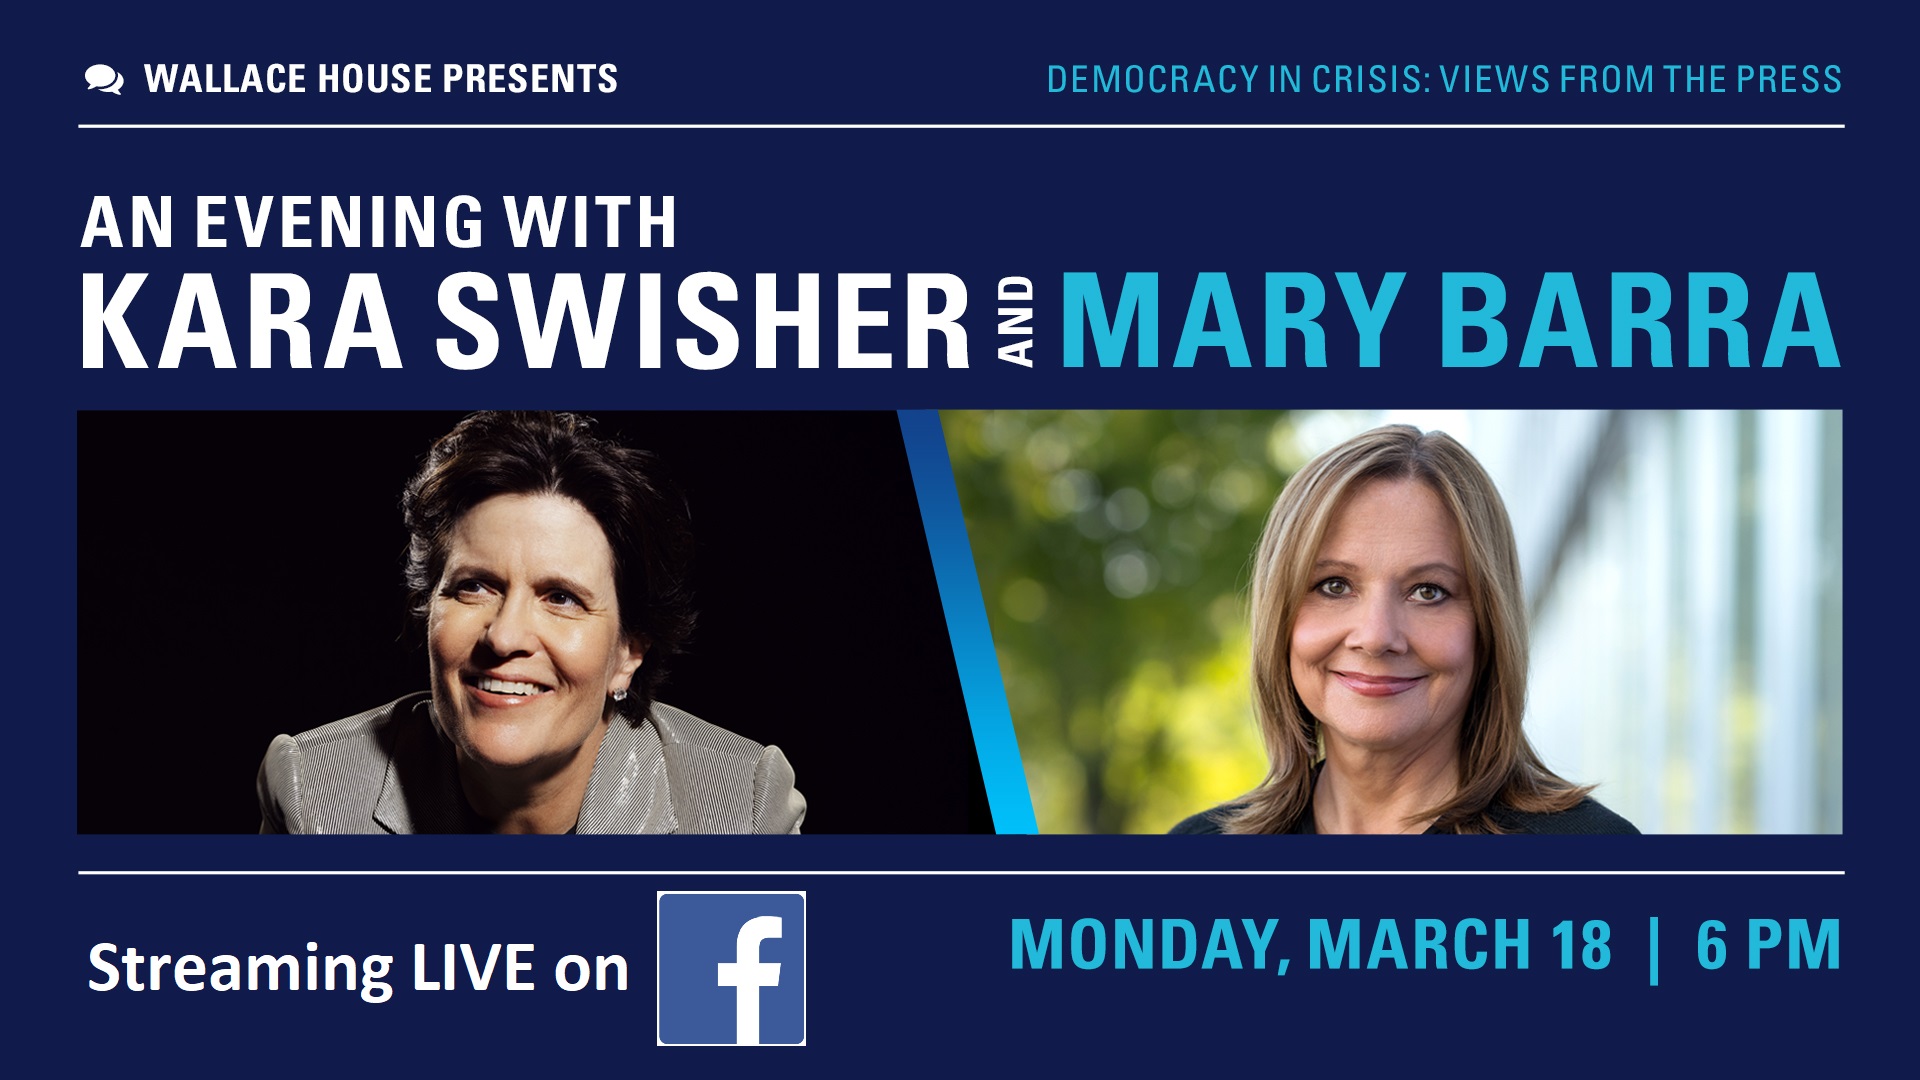 An evening with Kara Swisher and Mary Barra presented by the Wallace House Center for Journalists